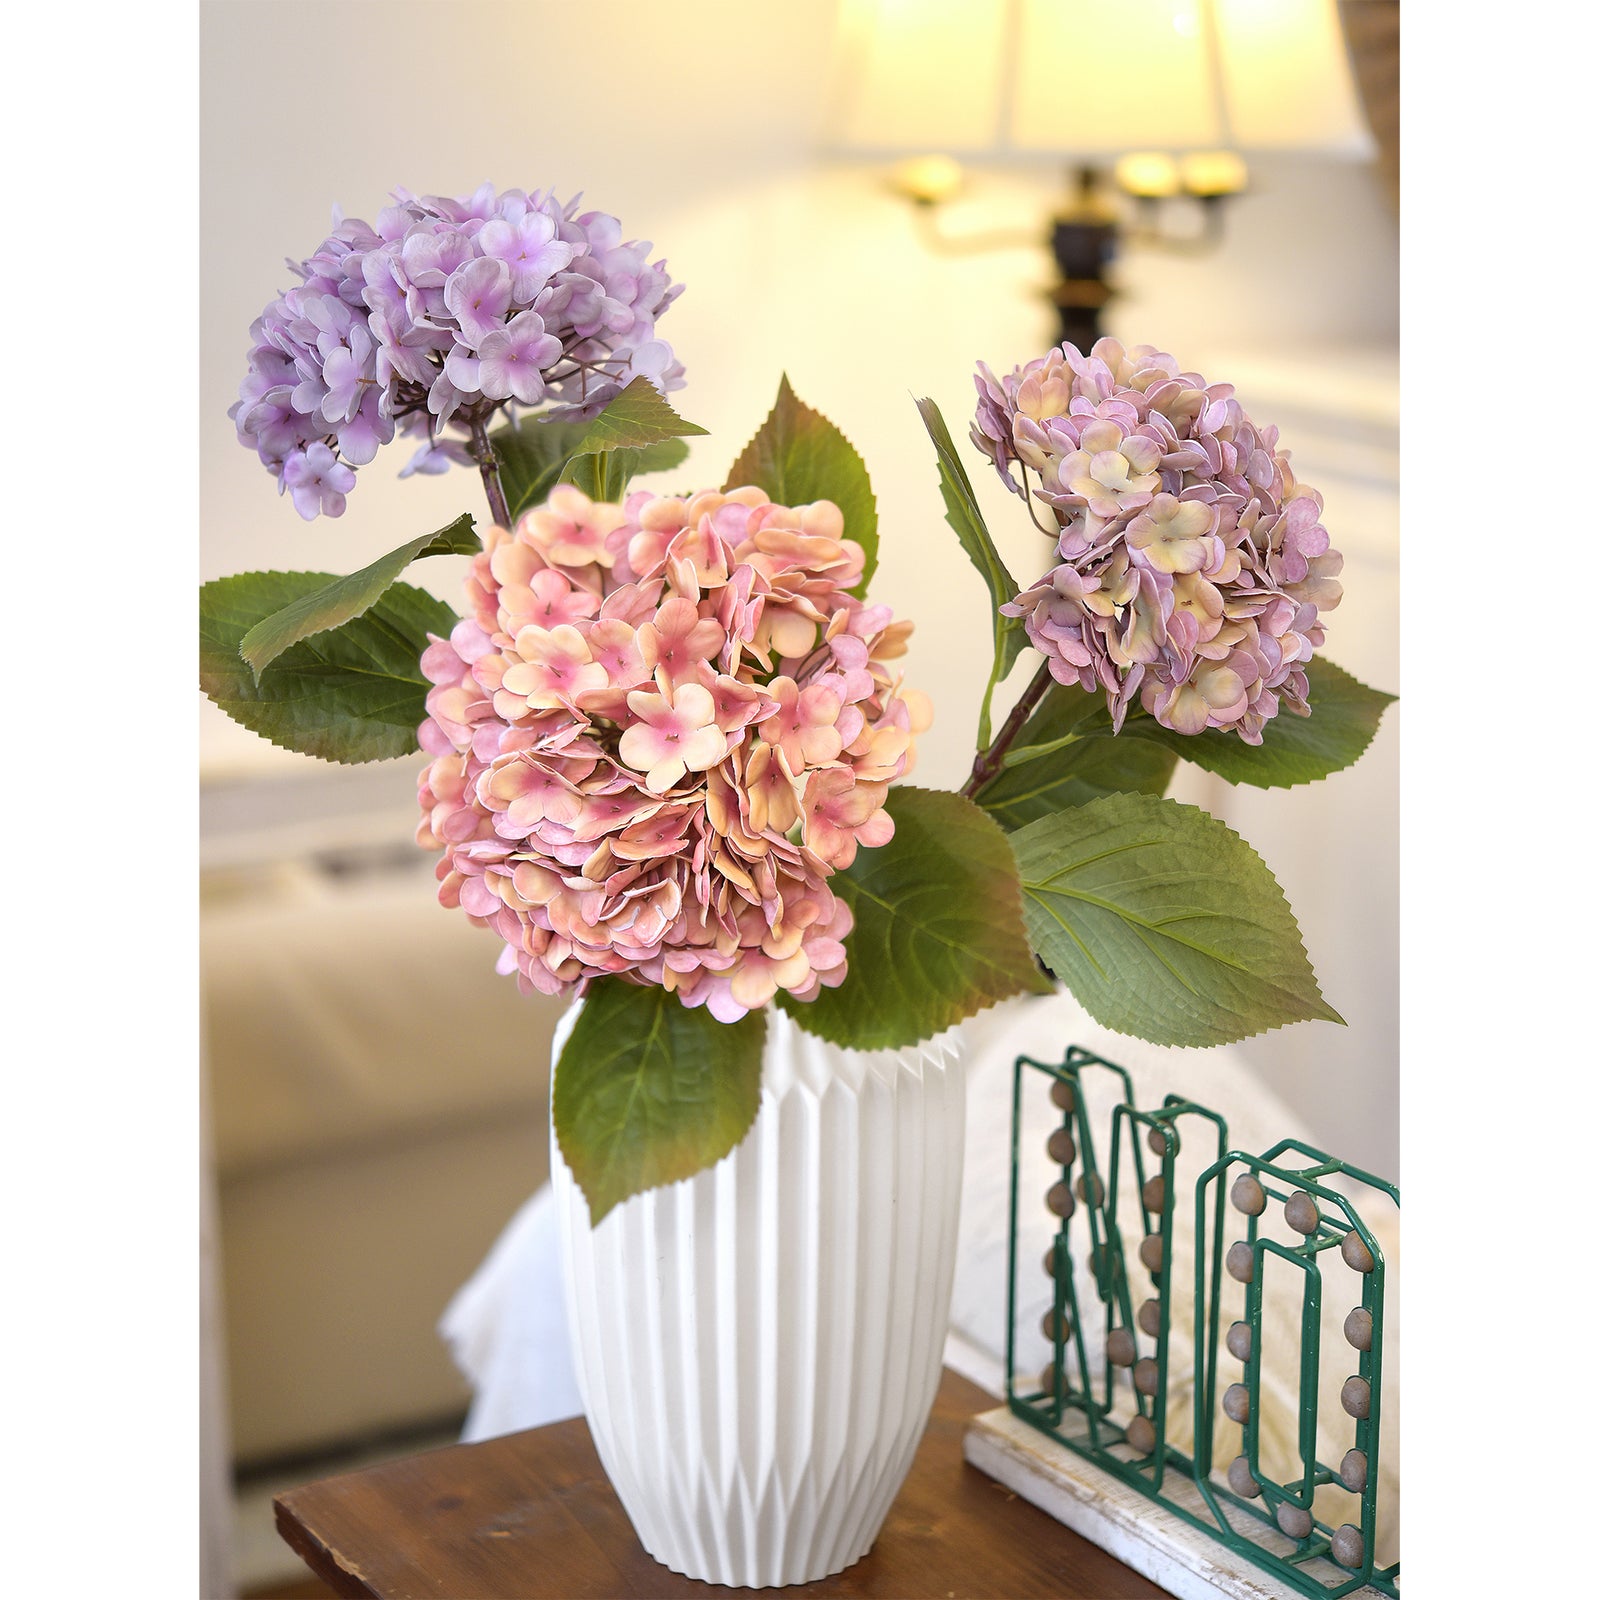 2 Long Stems Real Touch Hydrangea Artificial Flowers Blush Sunset (Warm Pink) Lifelike, Elegant, and Versatile Decor for Any Occasion (Copy)